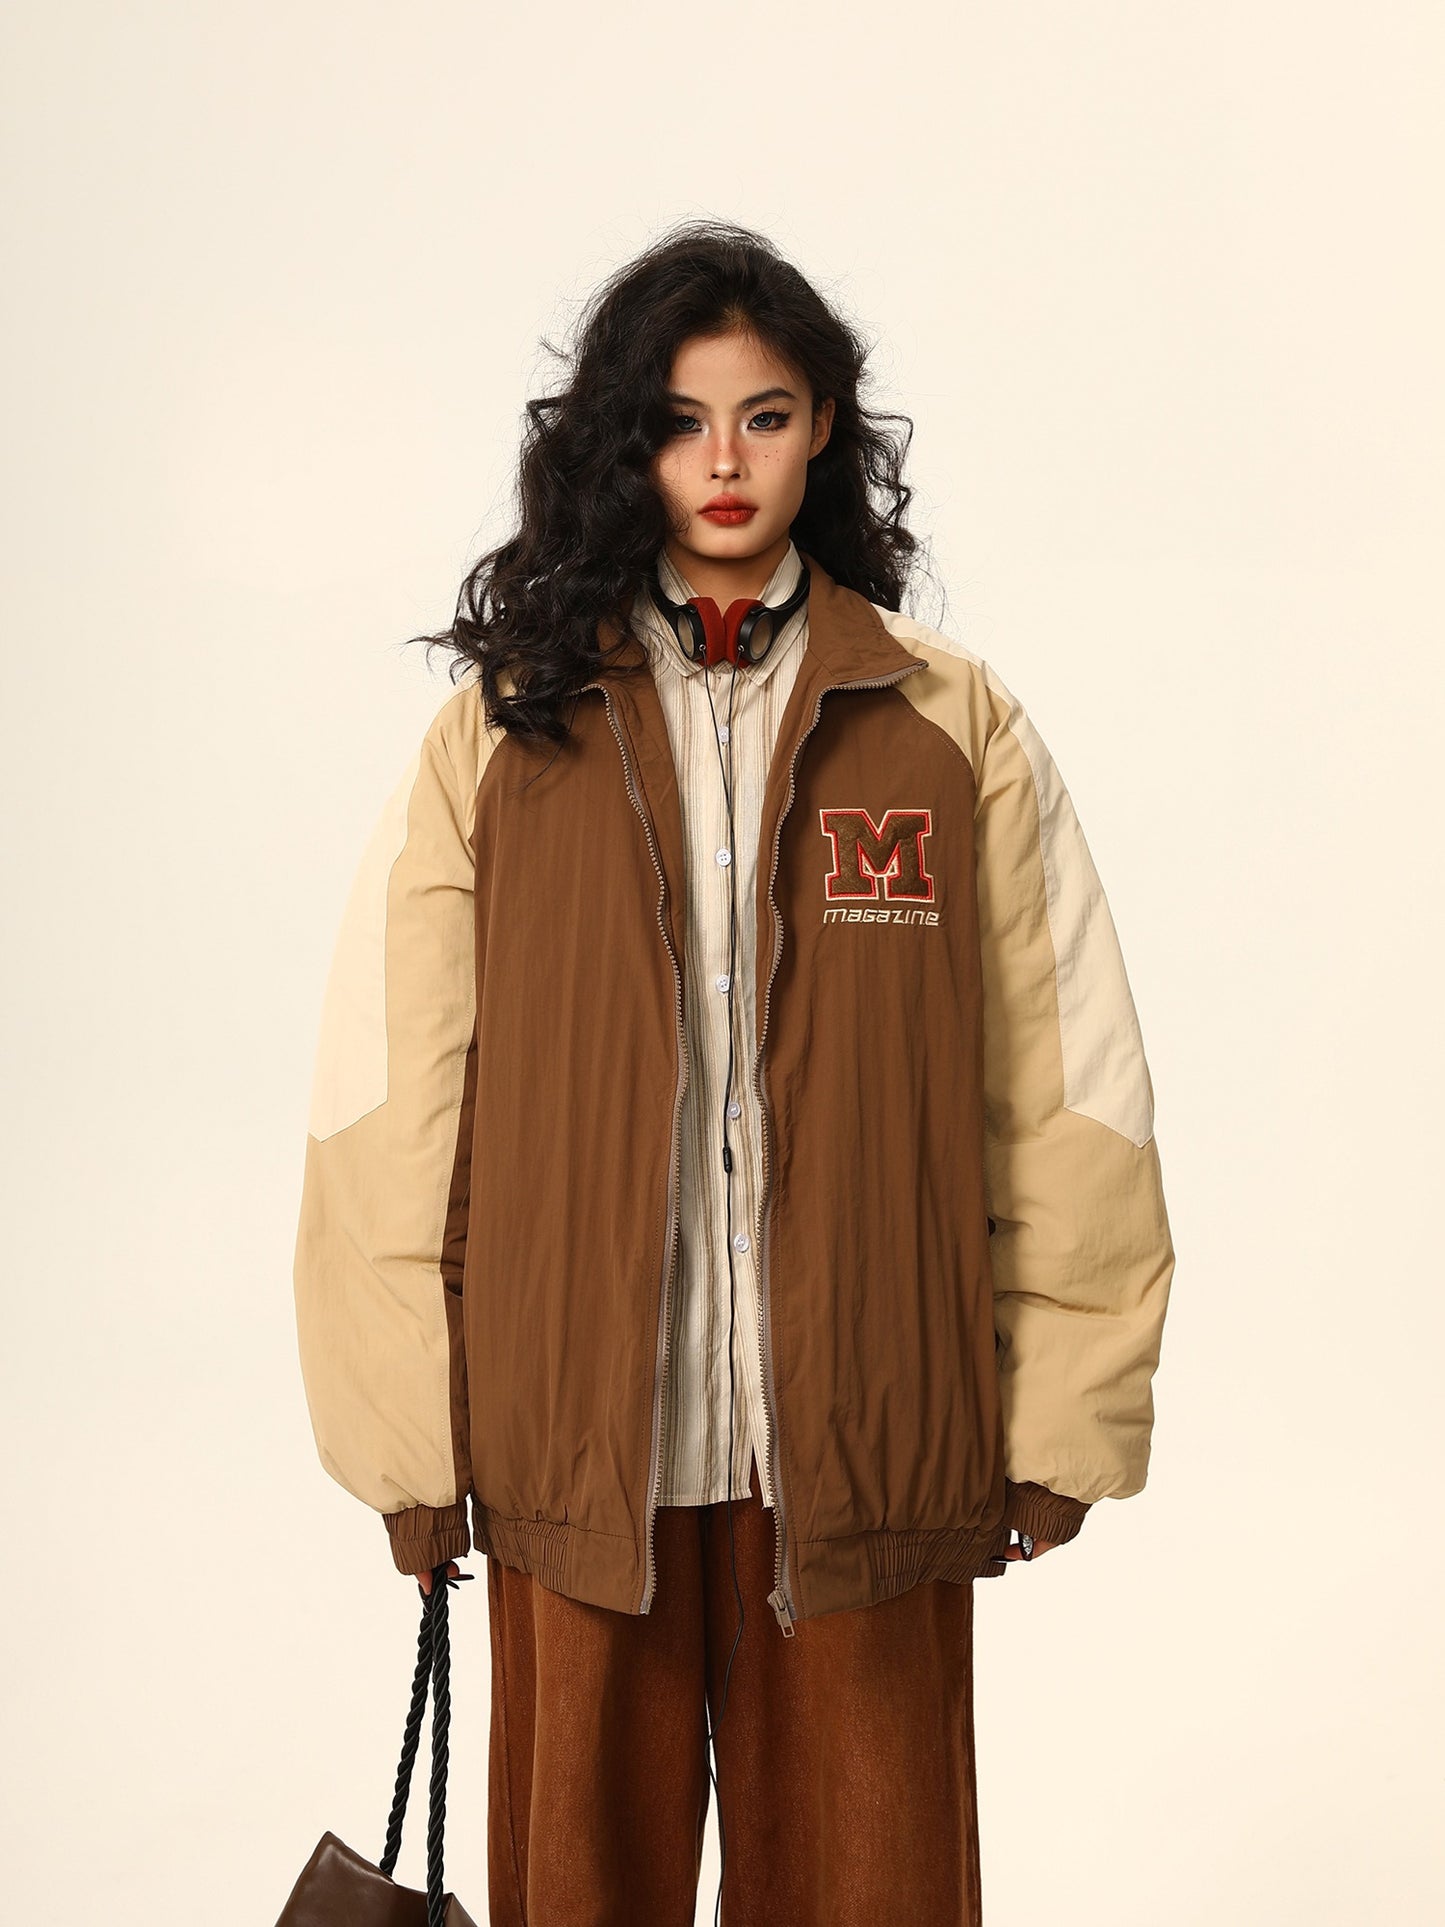 American Loose Embroidered Letter Jacket